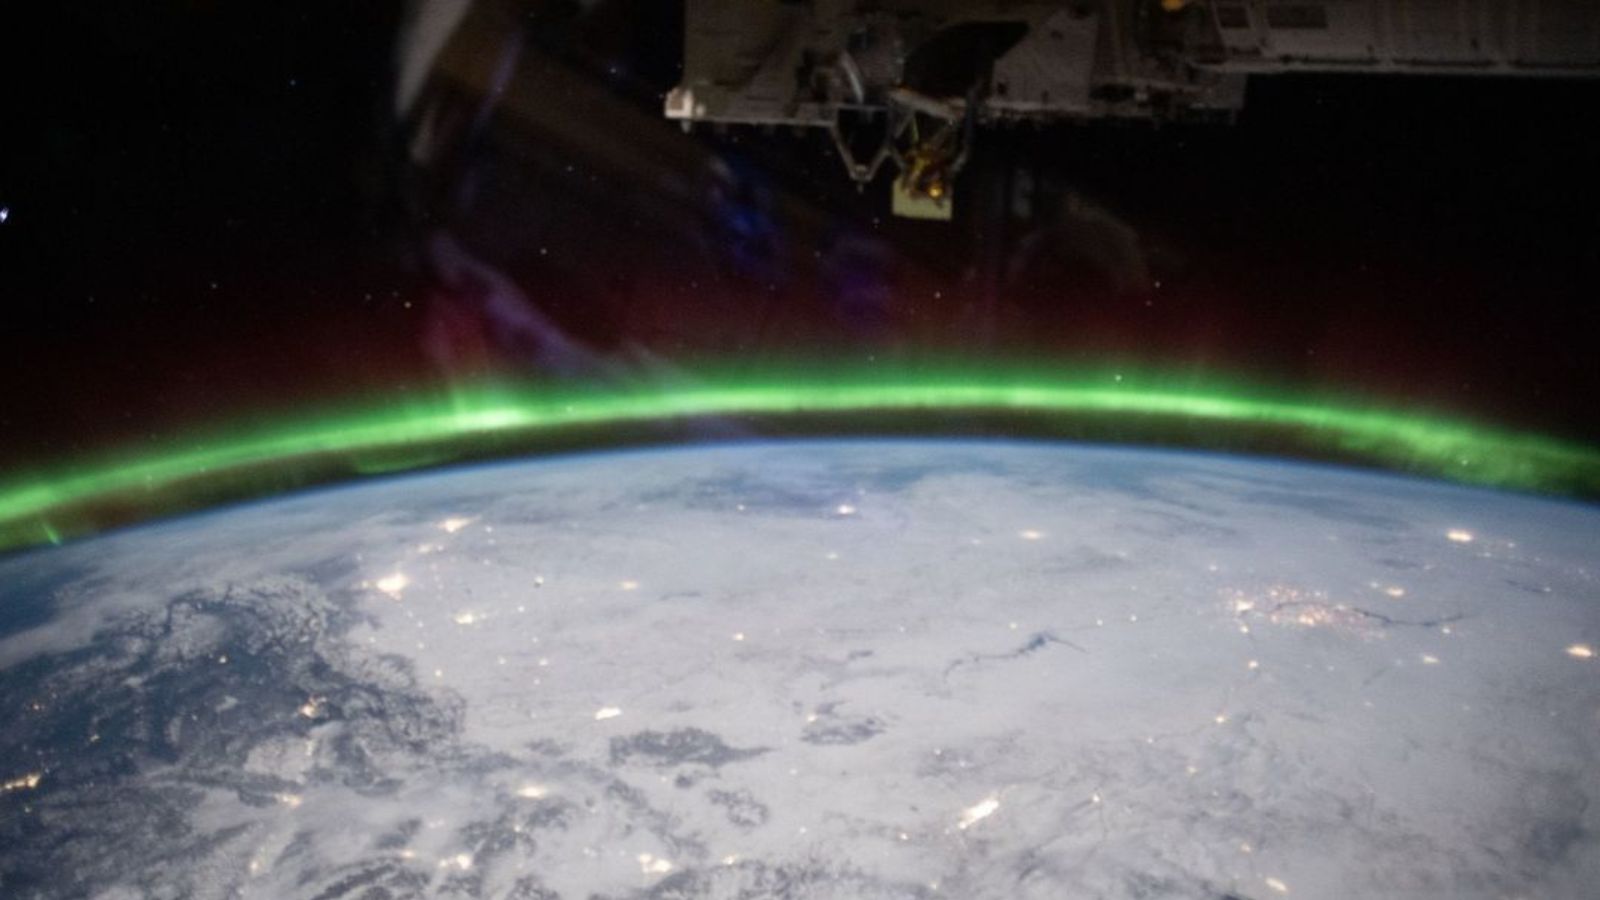 NASA shares breathtaking image of aurora taken from space station | Technology News